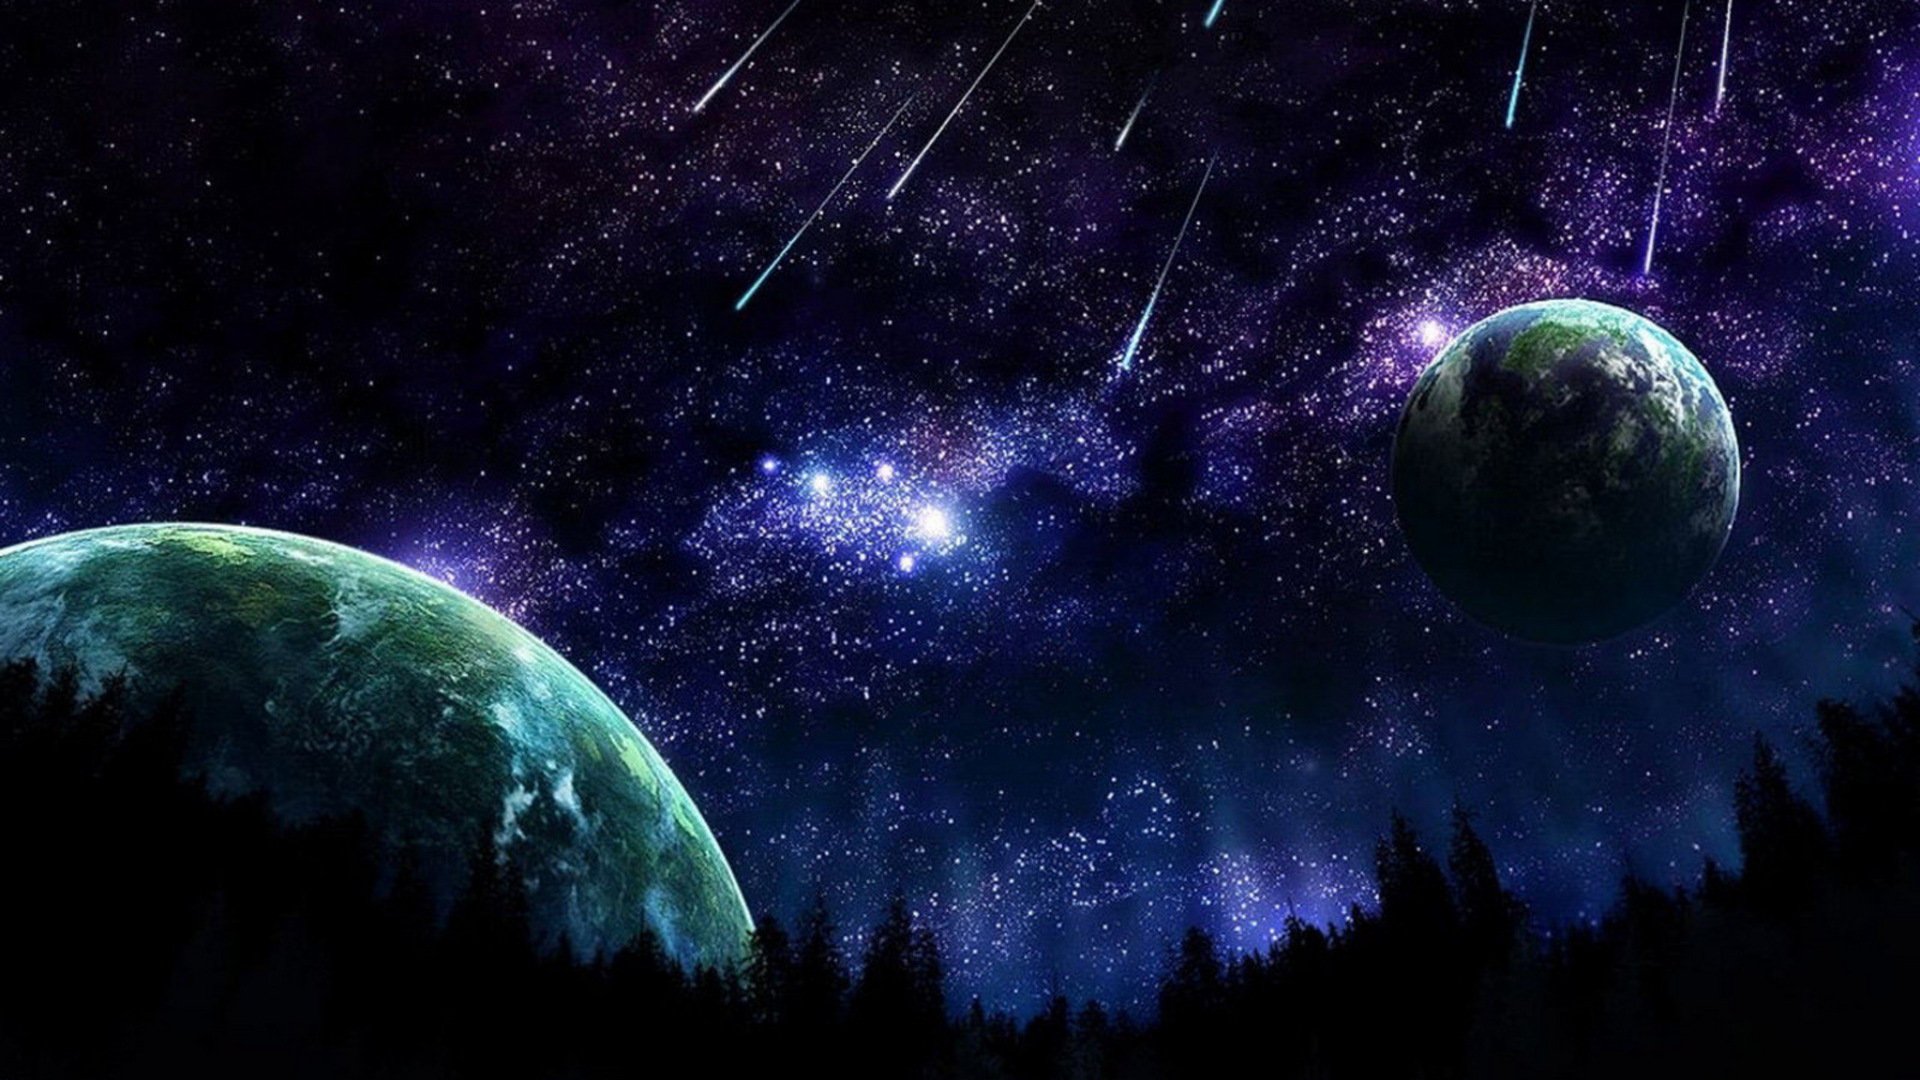 Outer Space Wallpaper 1920x1080 Outer Space Stars Planets 1920x1080